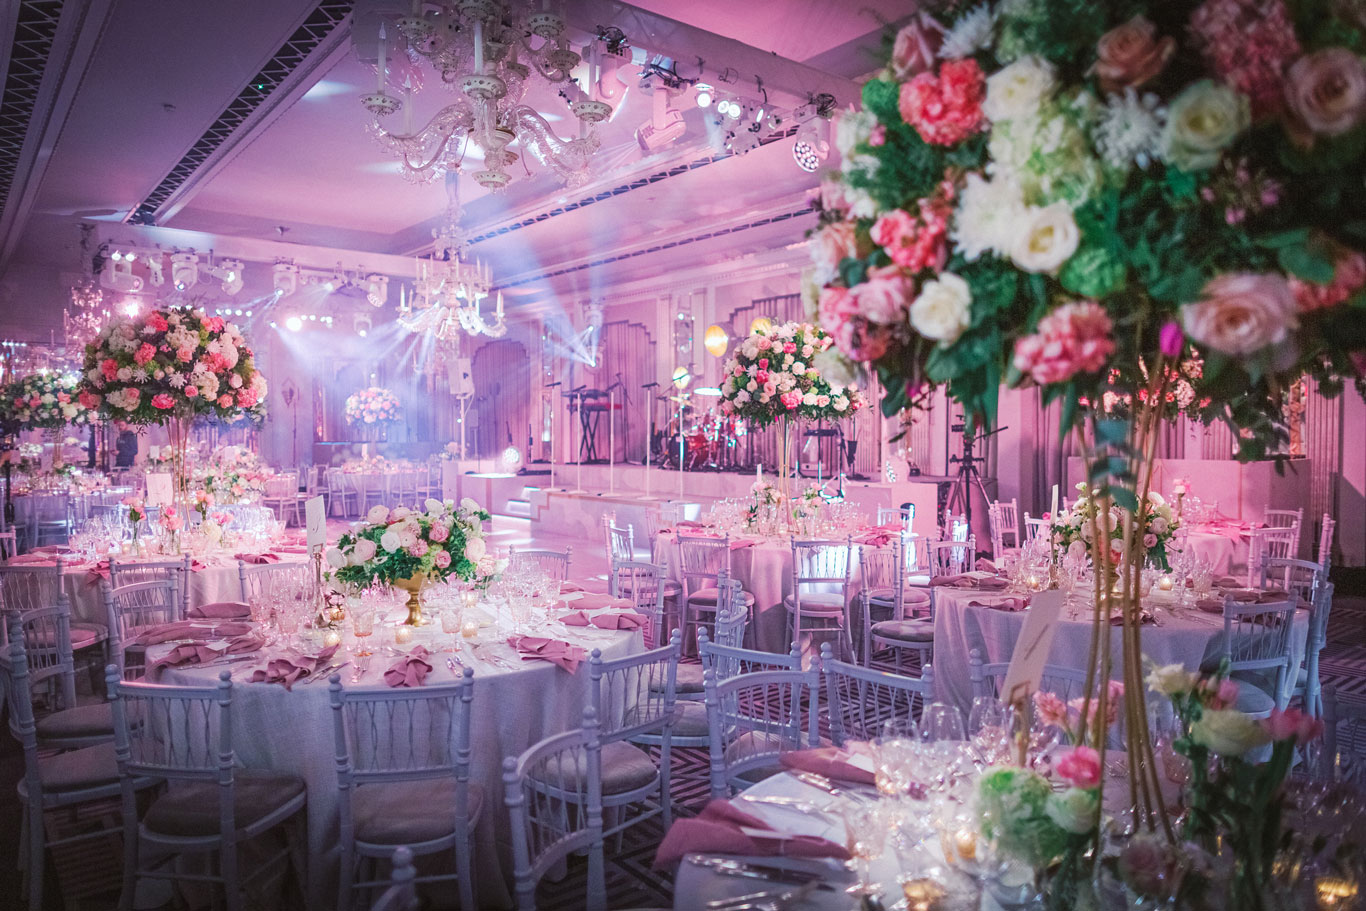 decorated wedding tables with floral and candle arrangements in Claridge's Hotel